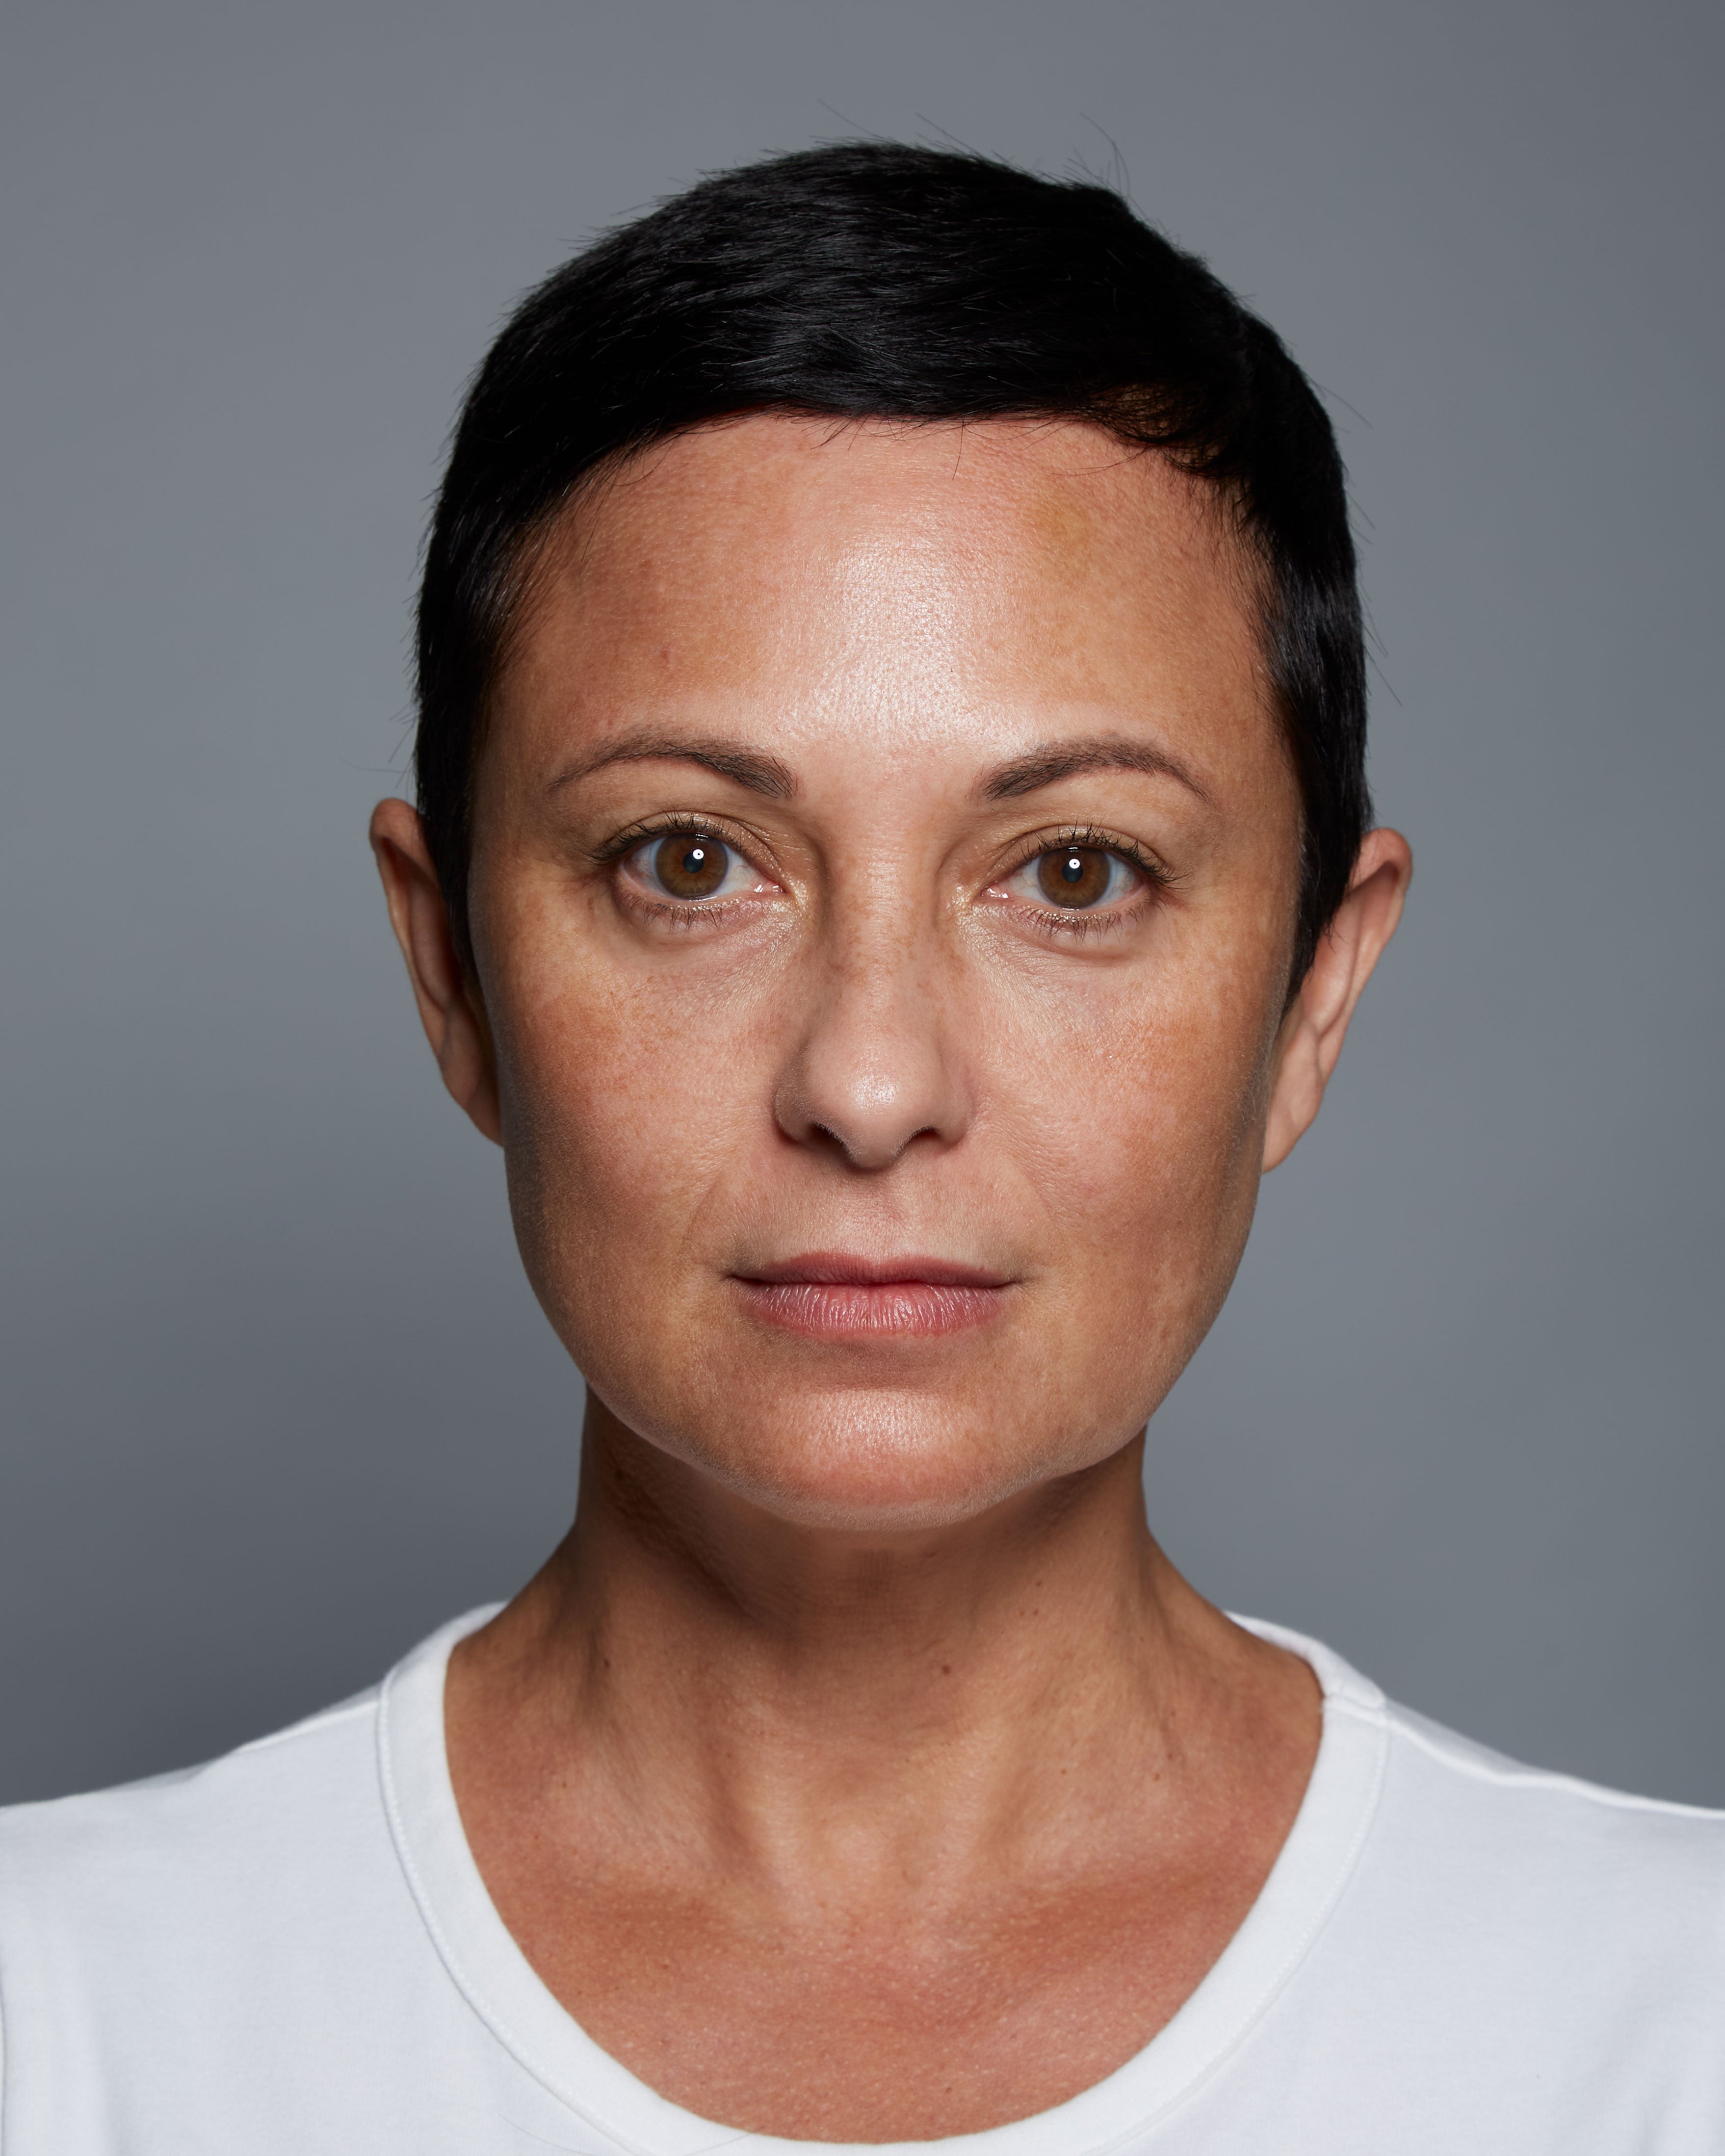 "After" headshot of a clinical subject who has used Michal Morrison Genesis BSTEM6 Molecular Serum, showing a woman with short brown hair and a white shirt looking at camera.